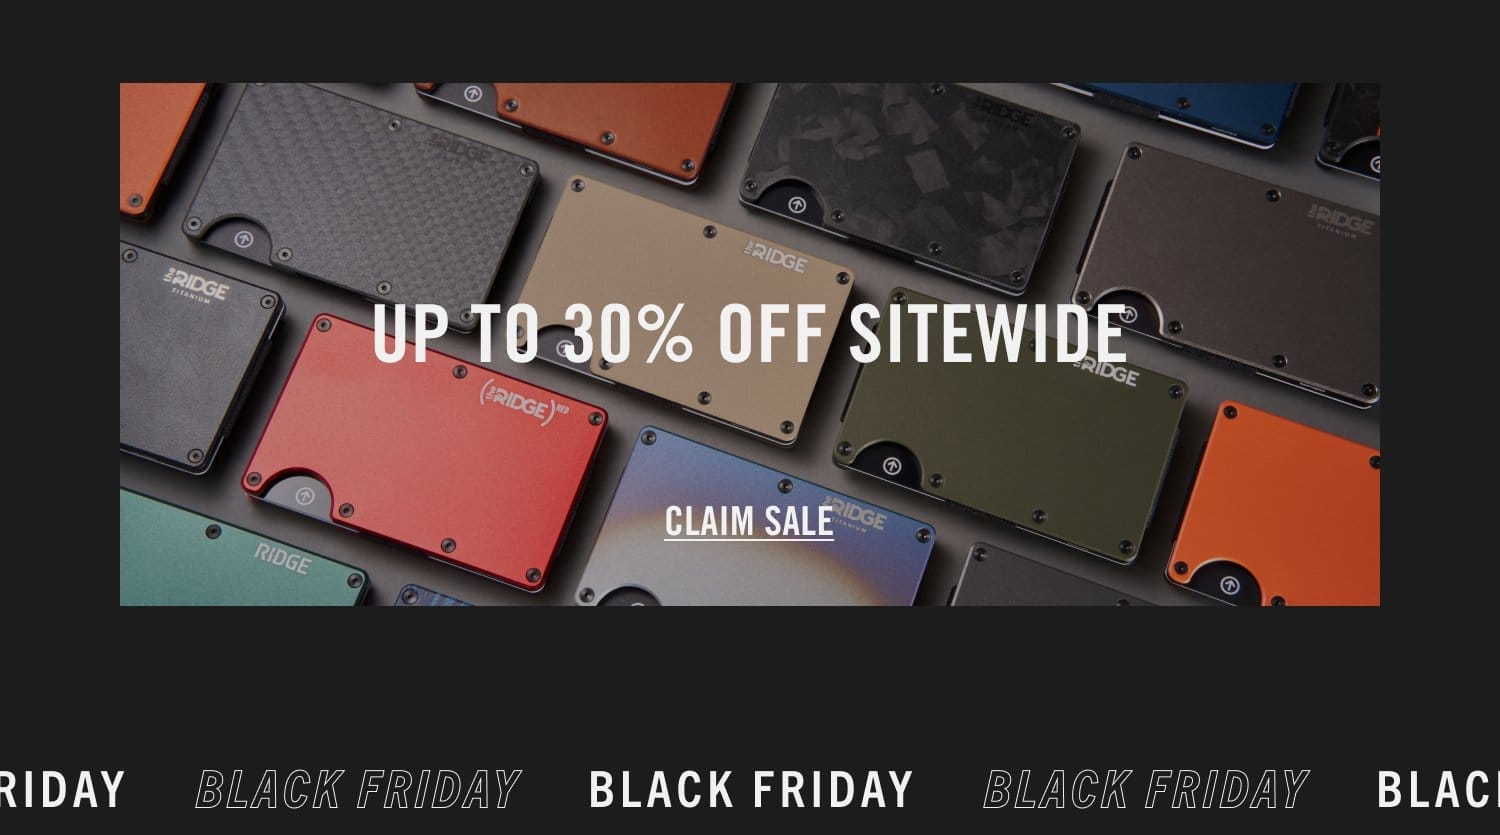 UP TO 30% OFF SITEWIDE